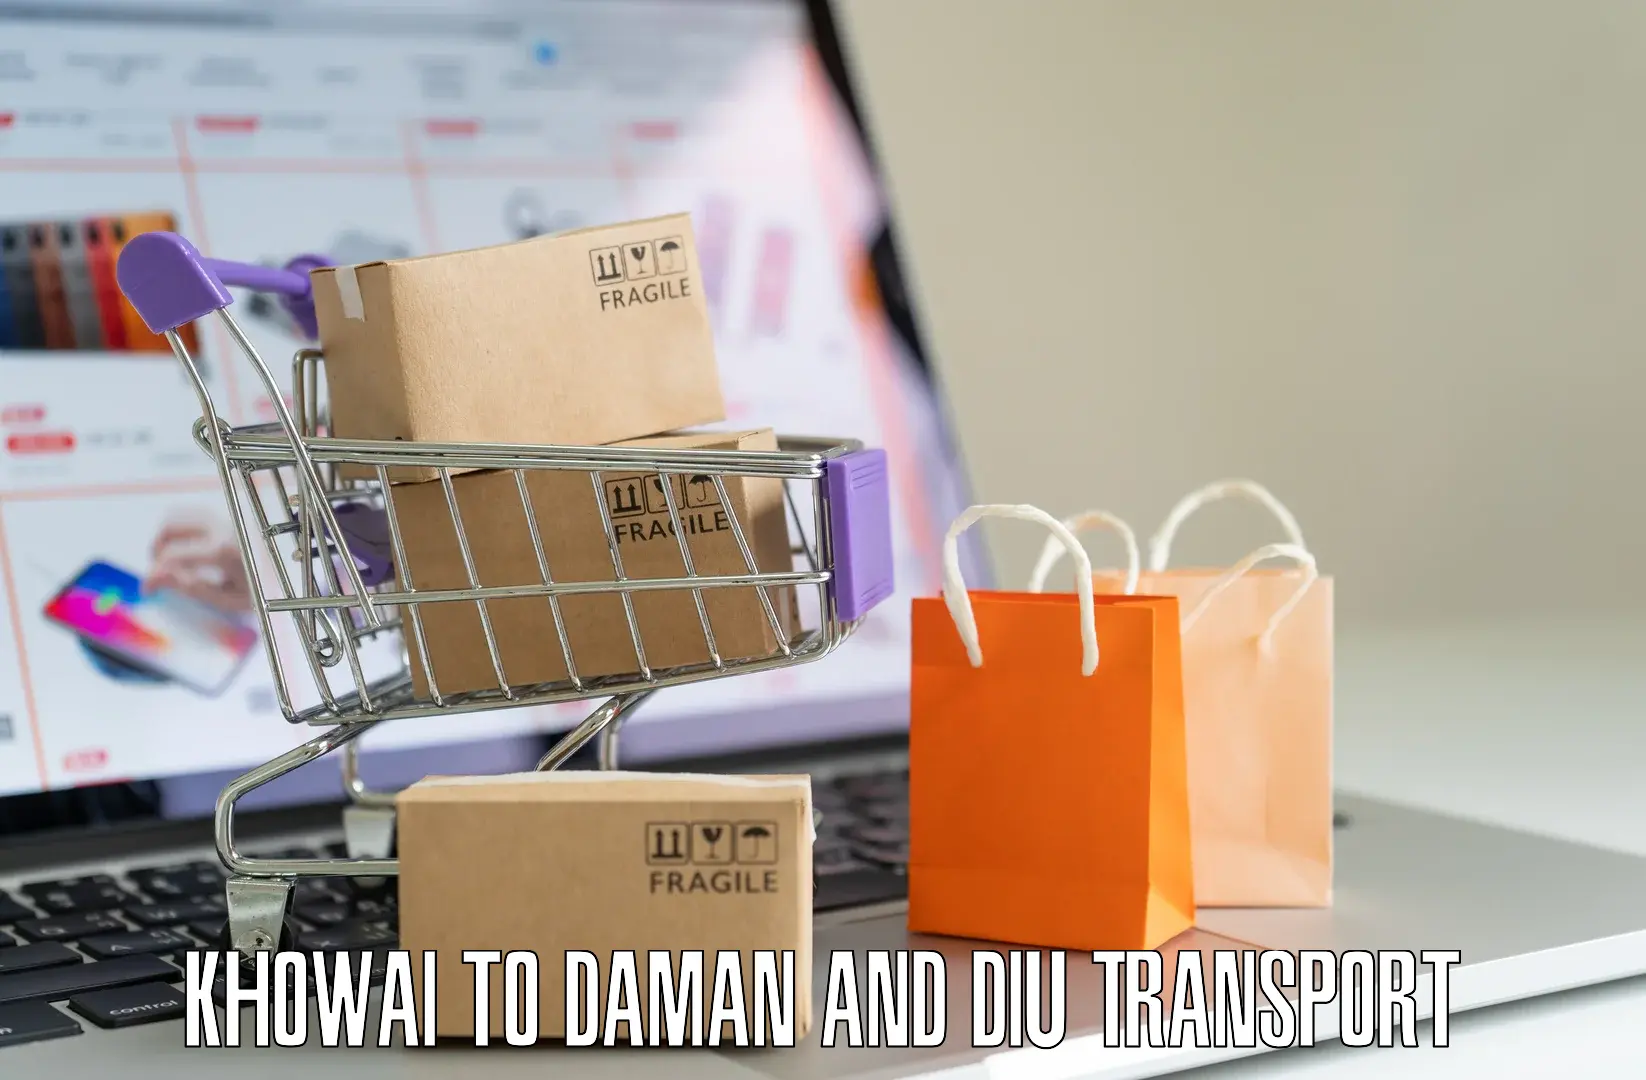 Parcel transport services Khowai to Daman and Diu